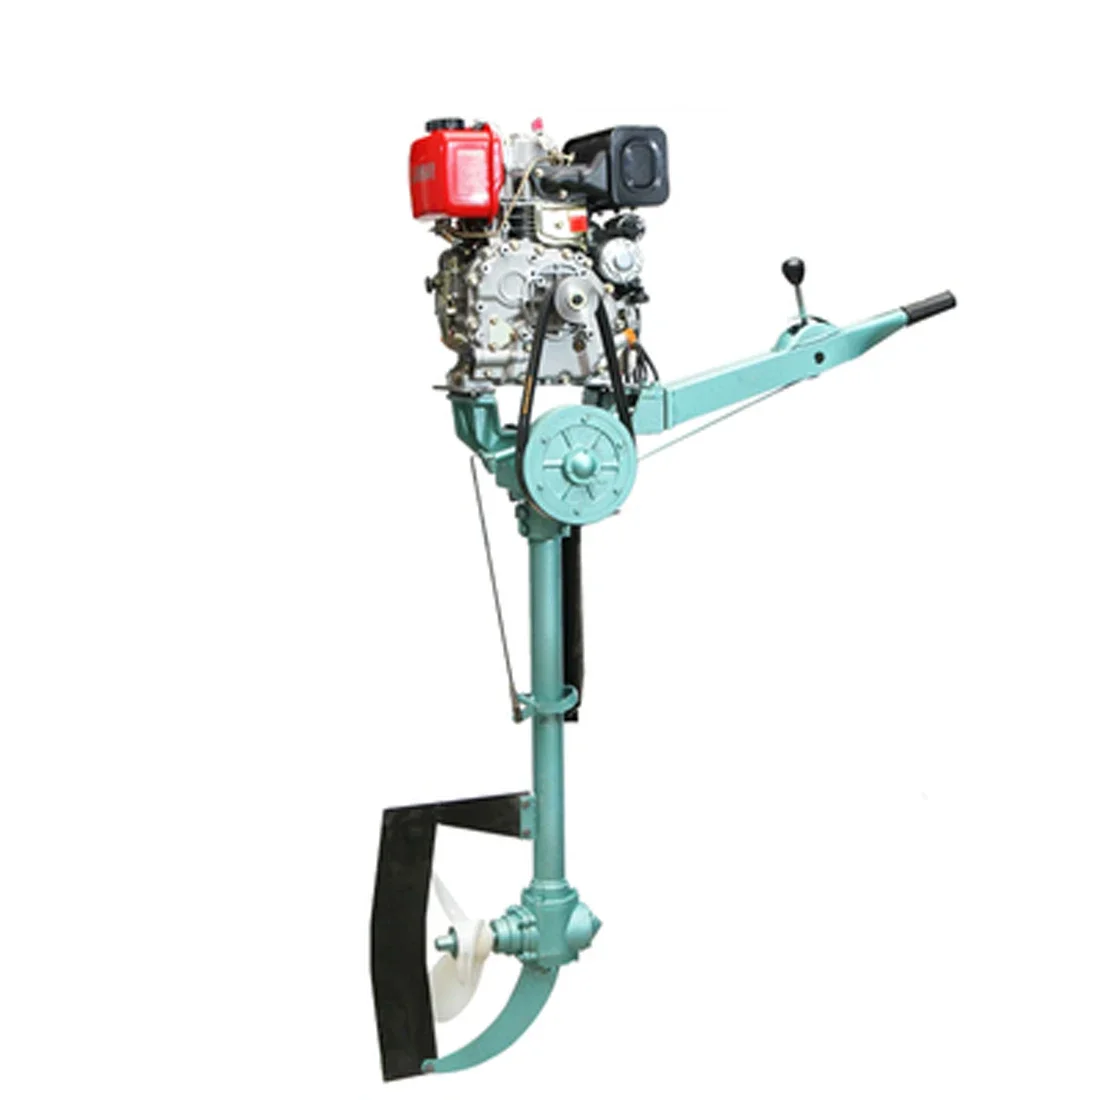 

Diesel engine propeller air cooled outboard single cylinder marine propeller underwater electric propeller engine small